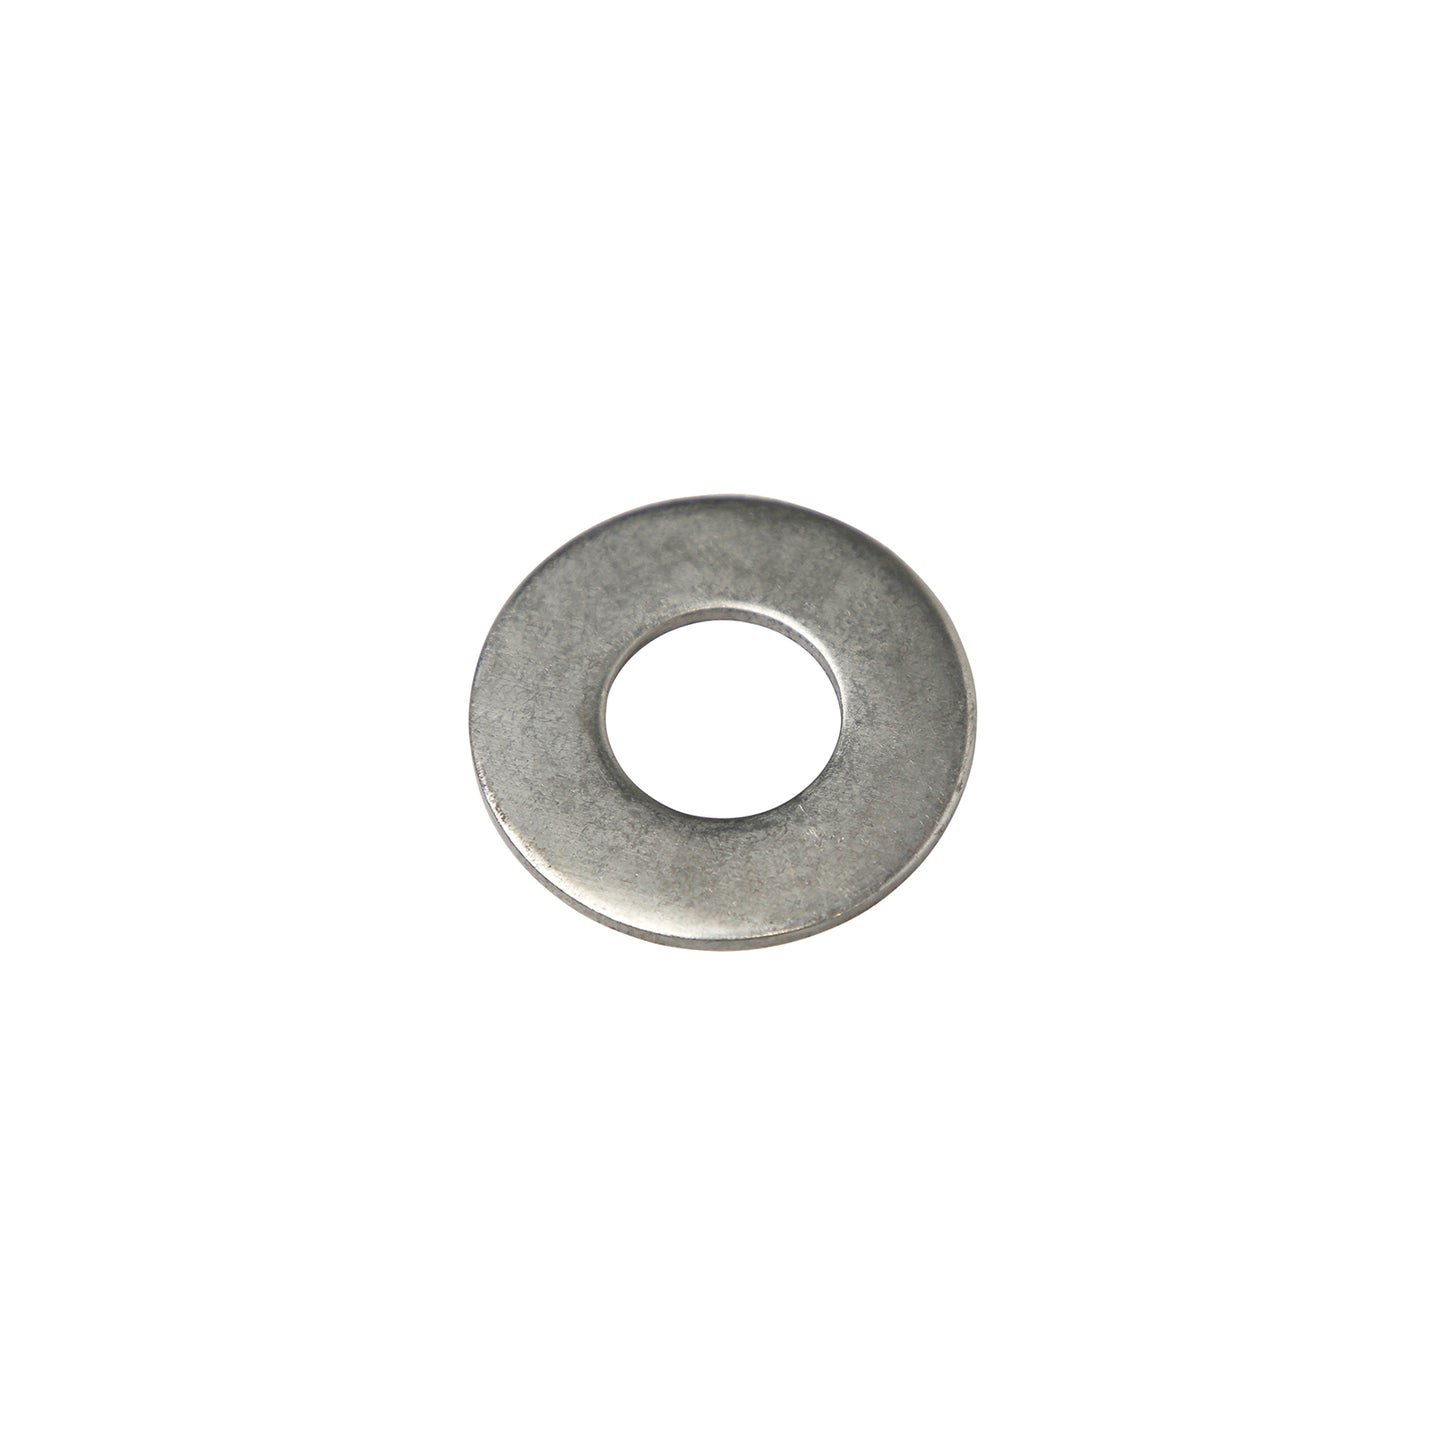 5/8" Conquest USS Flat Washer - 316 Stainless Steel